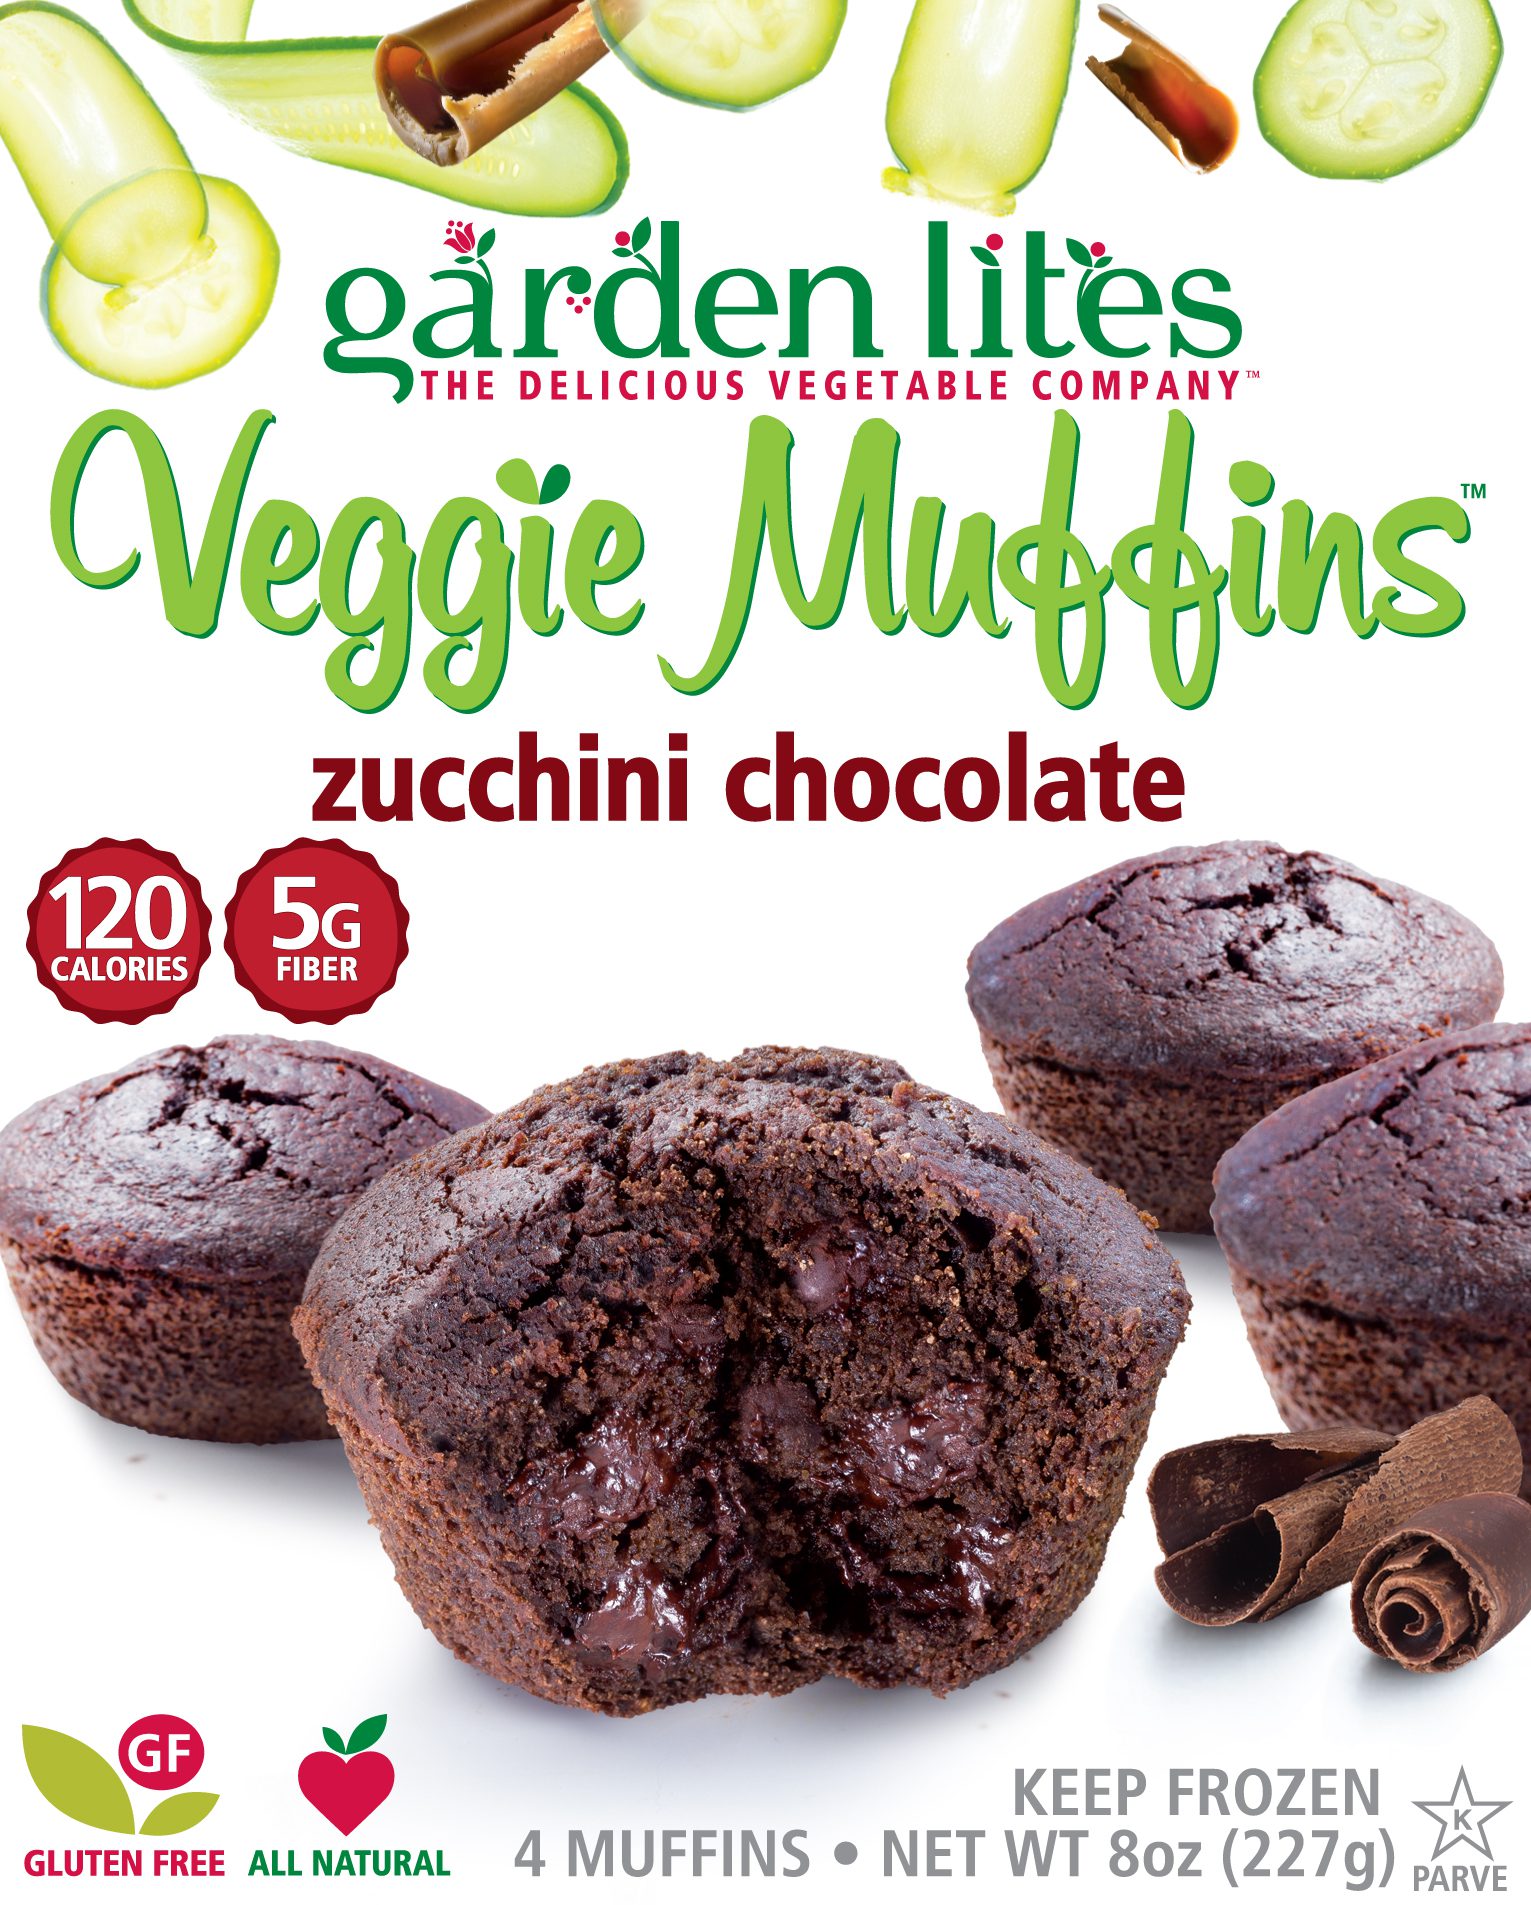 Check Out Garden Lites Veggie Muffins Which Are Gluten Free And